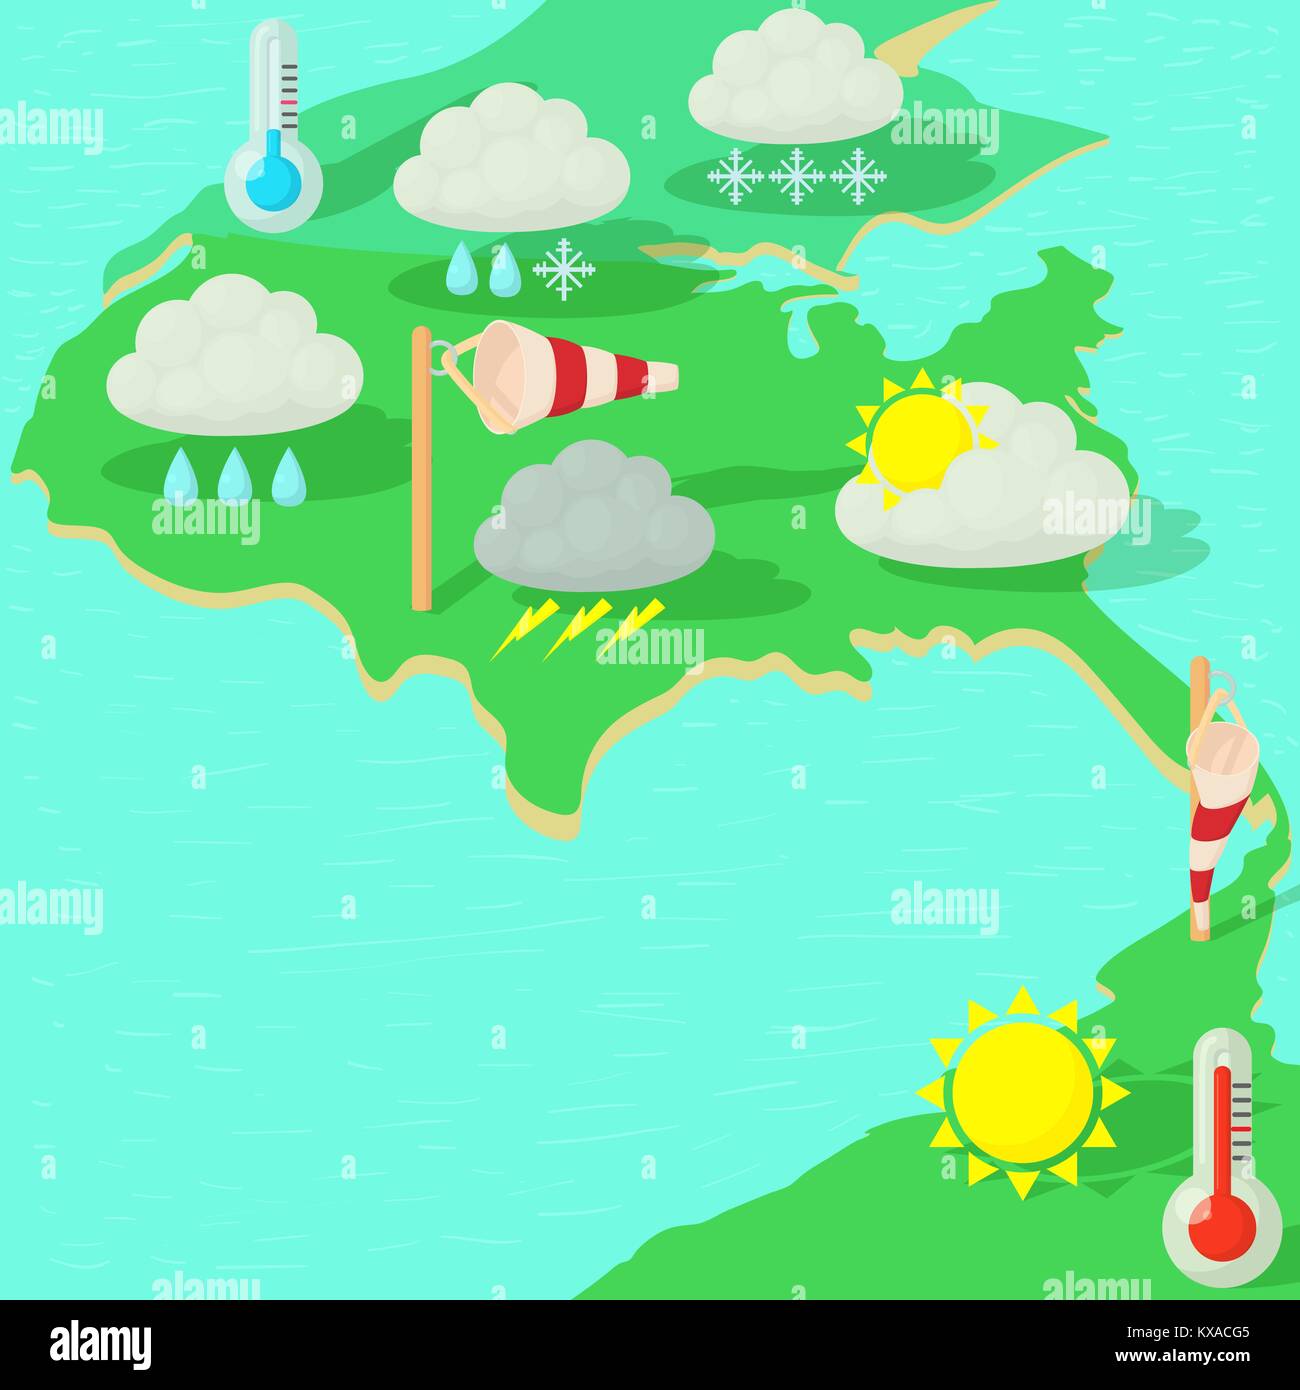 Weather symbols concept map, cartoon style Stock Vector